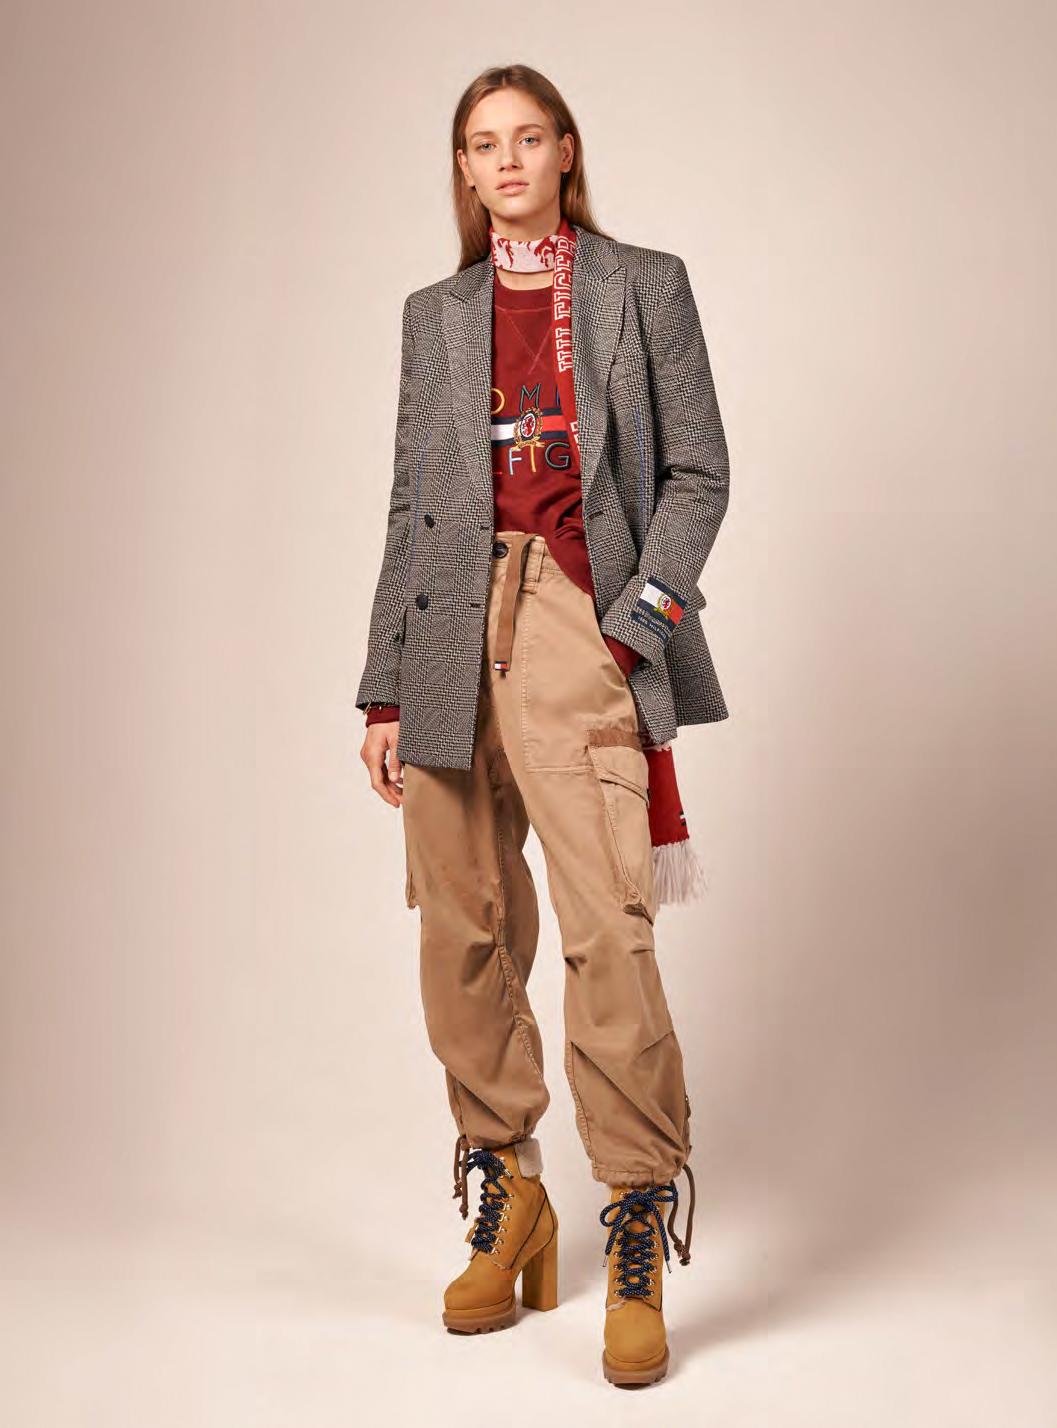 Hilfiger Collection Pre-Fall 2018